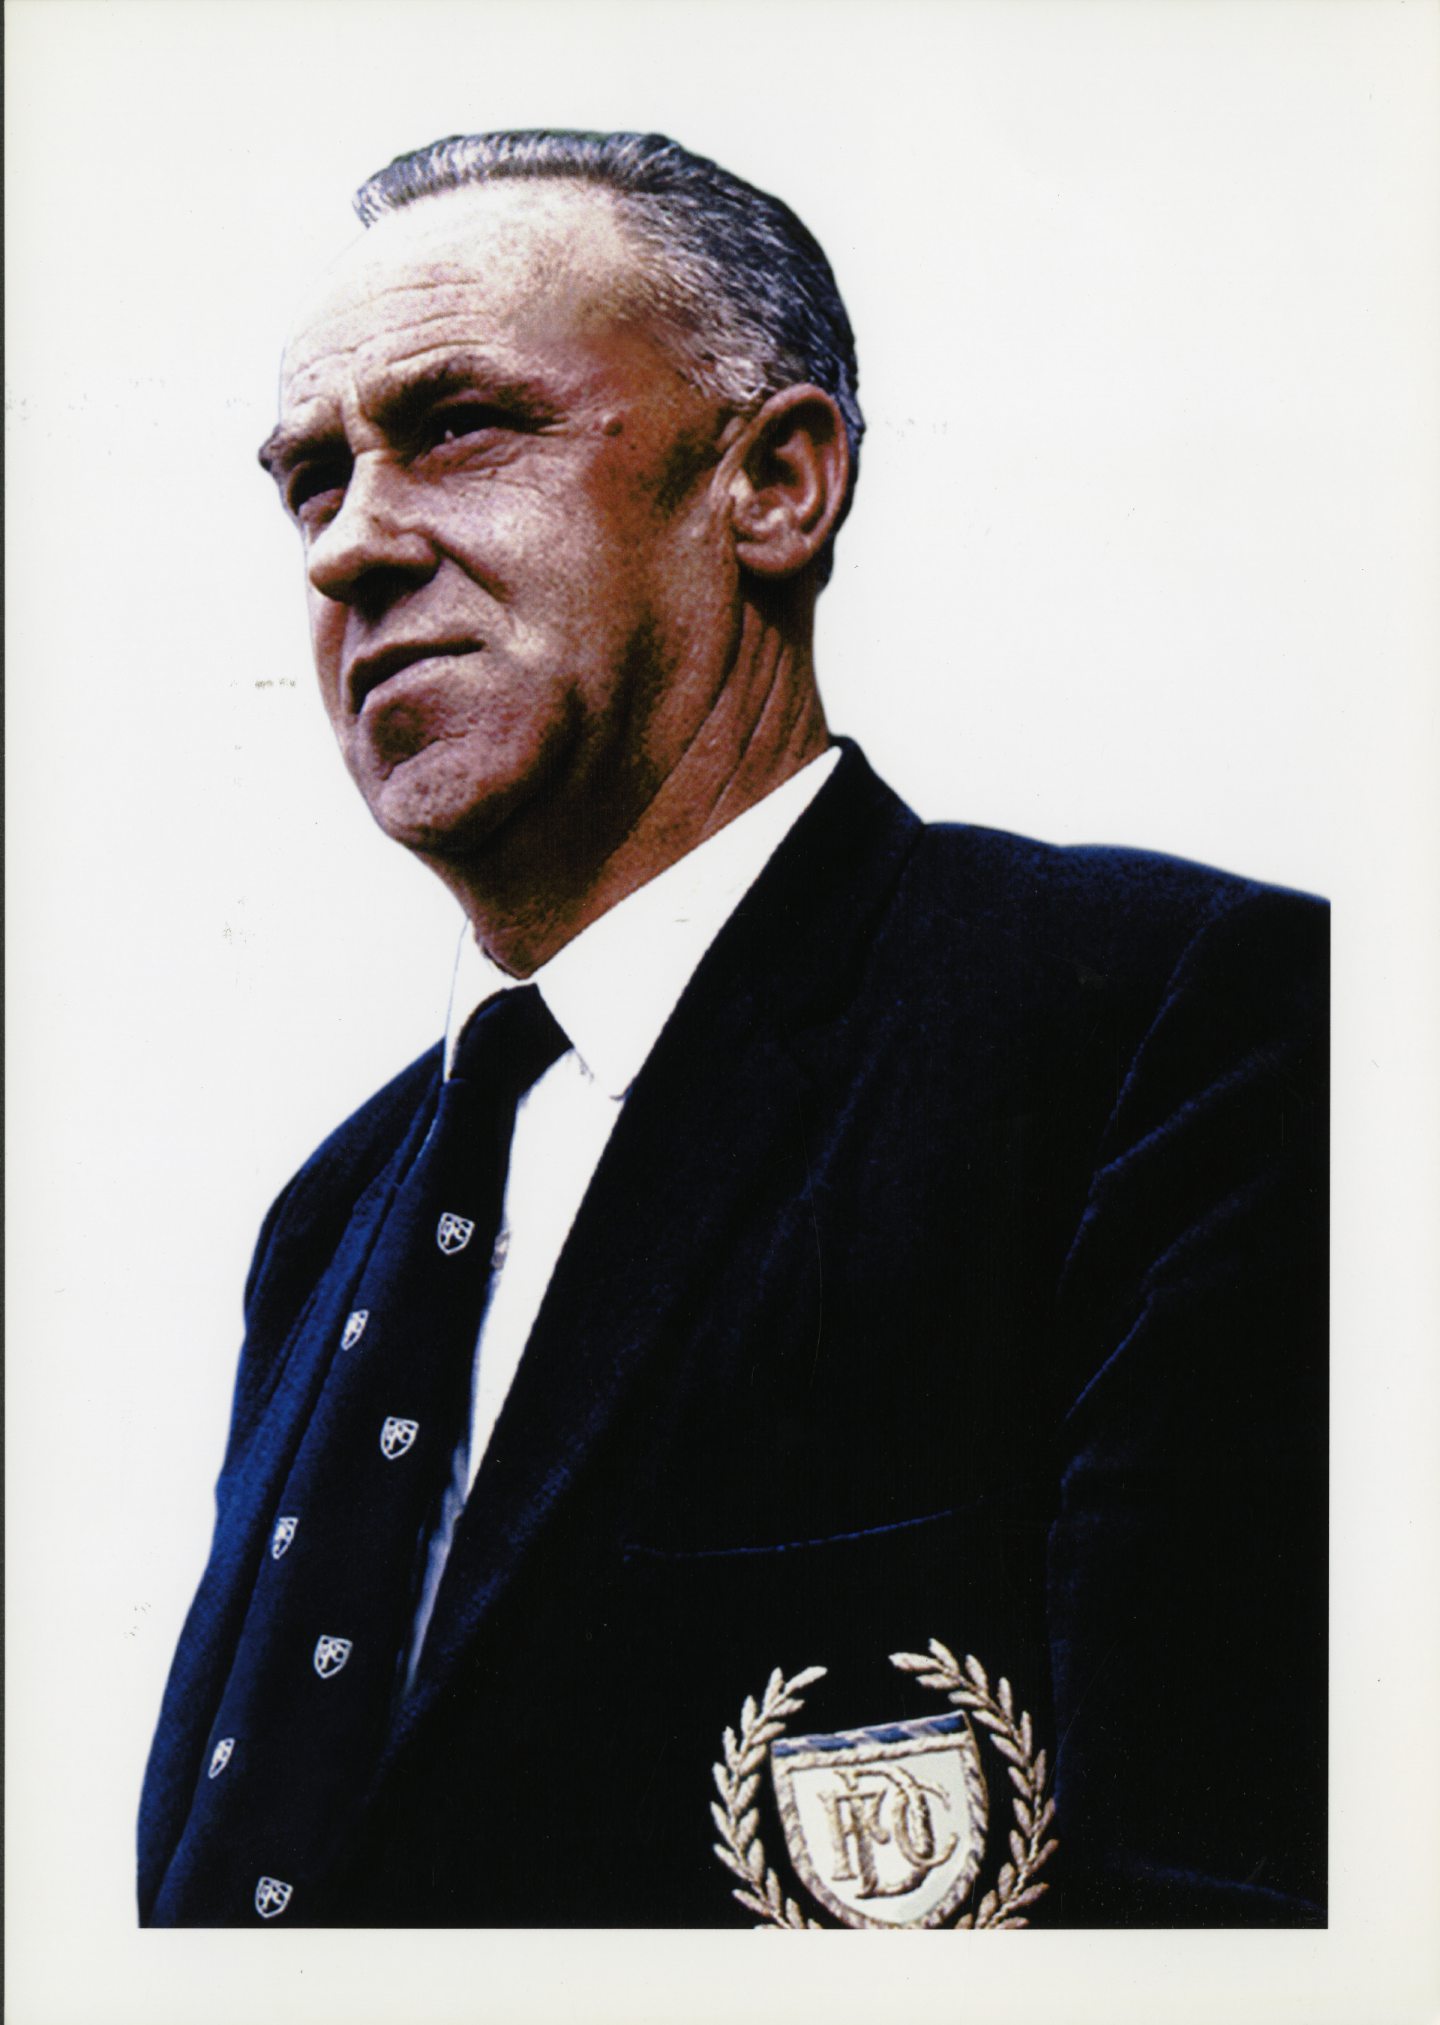 Bob Shankly wearing his official Dundee FC blazer in 1962.